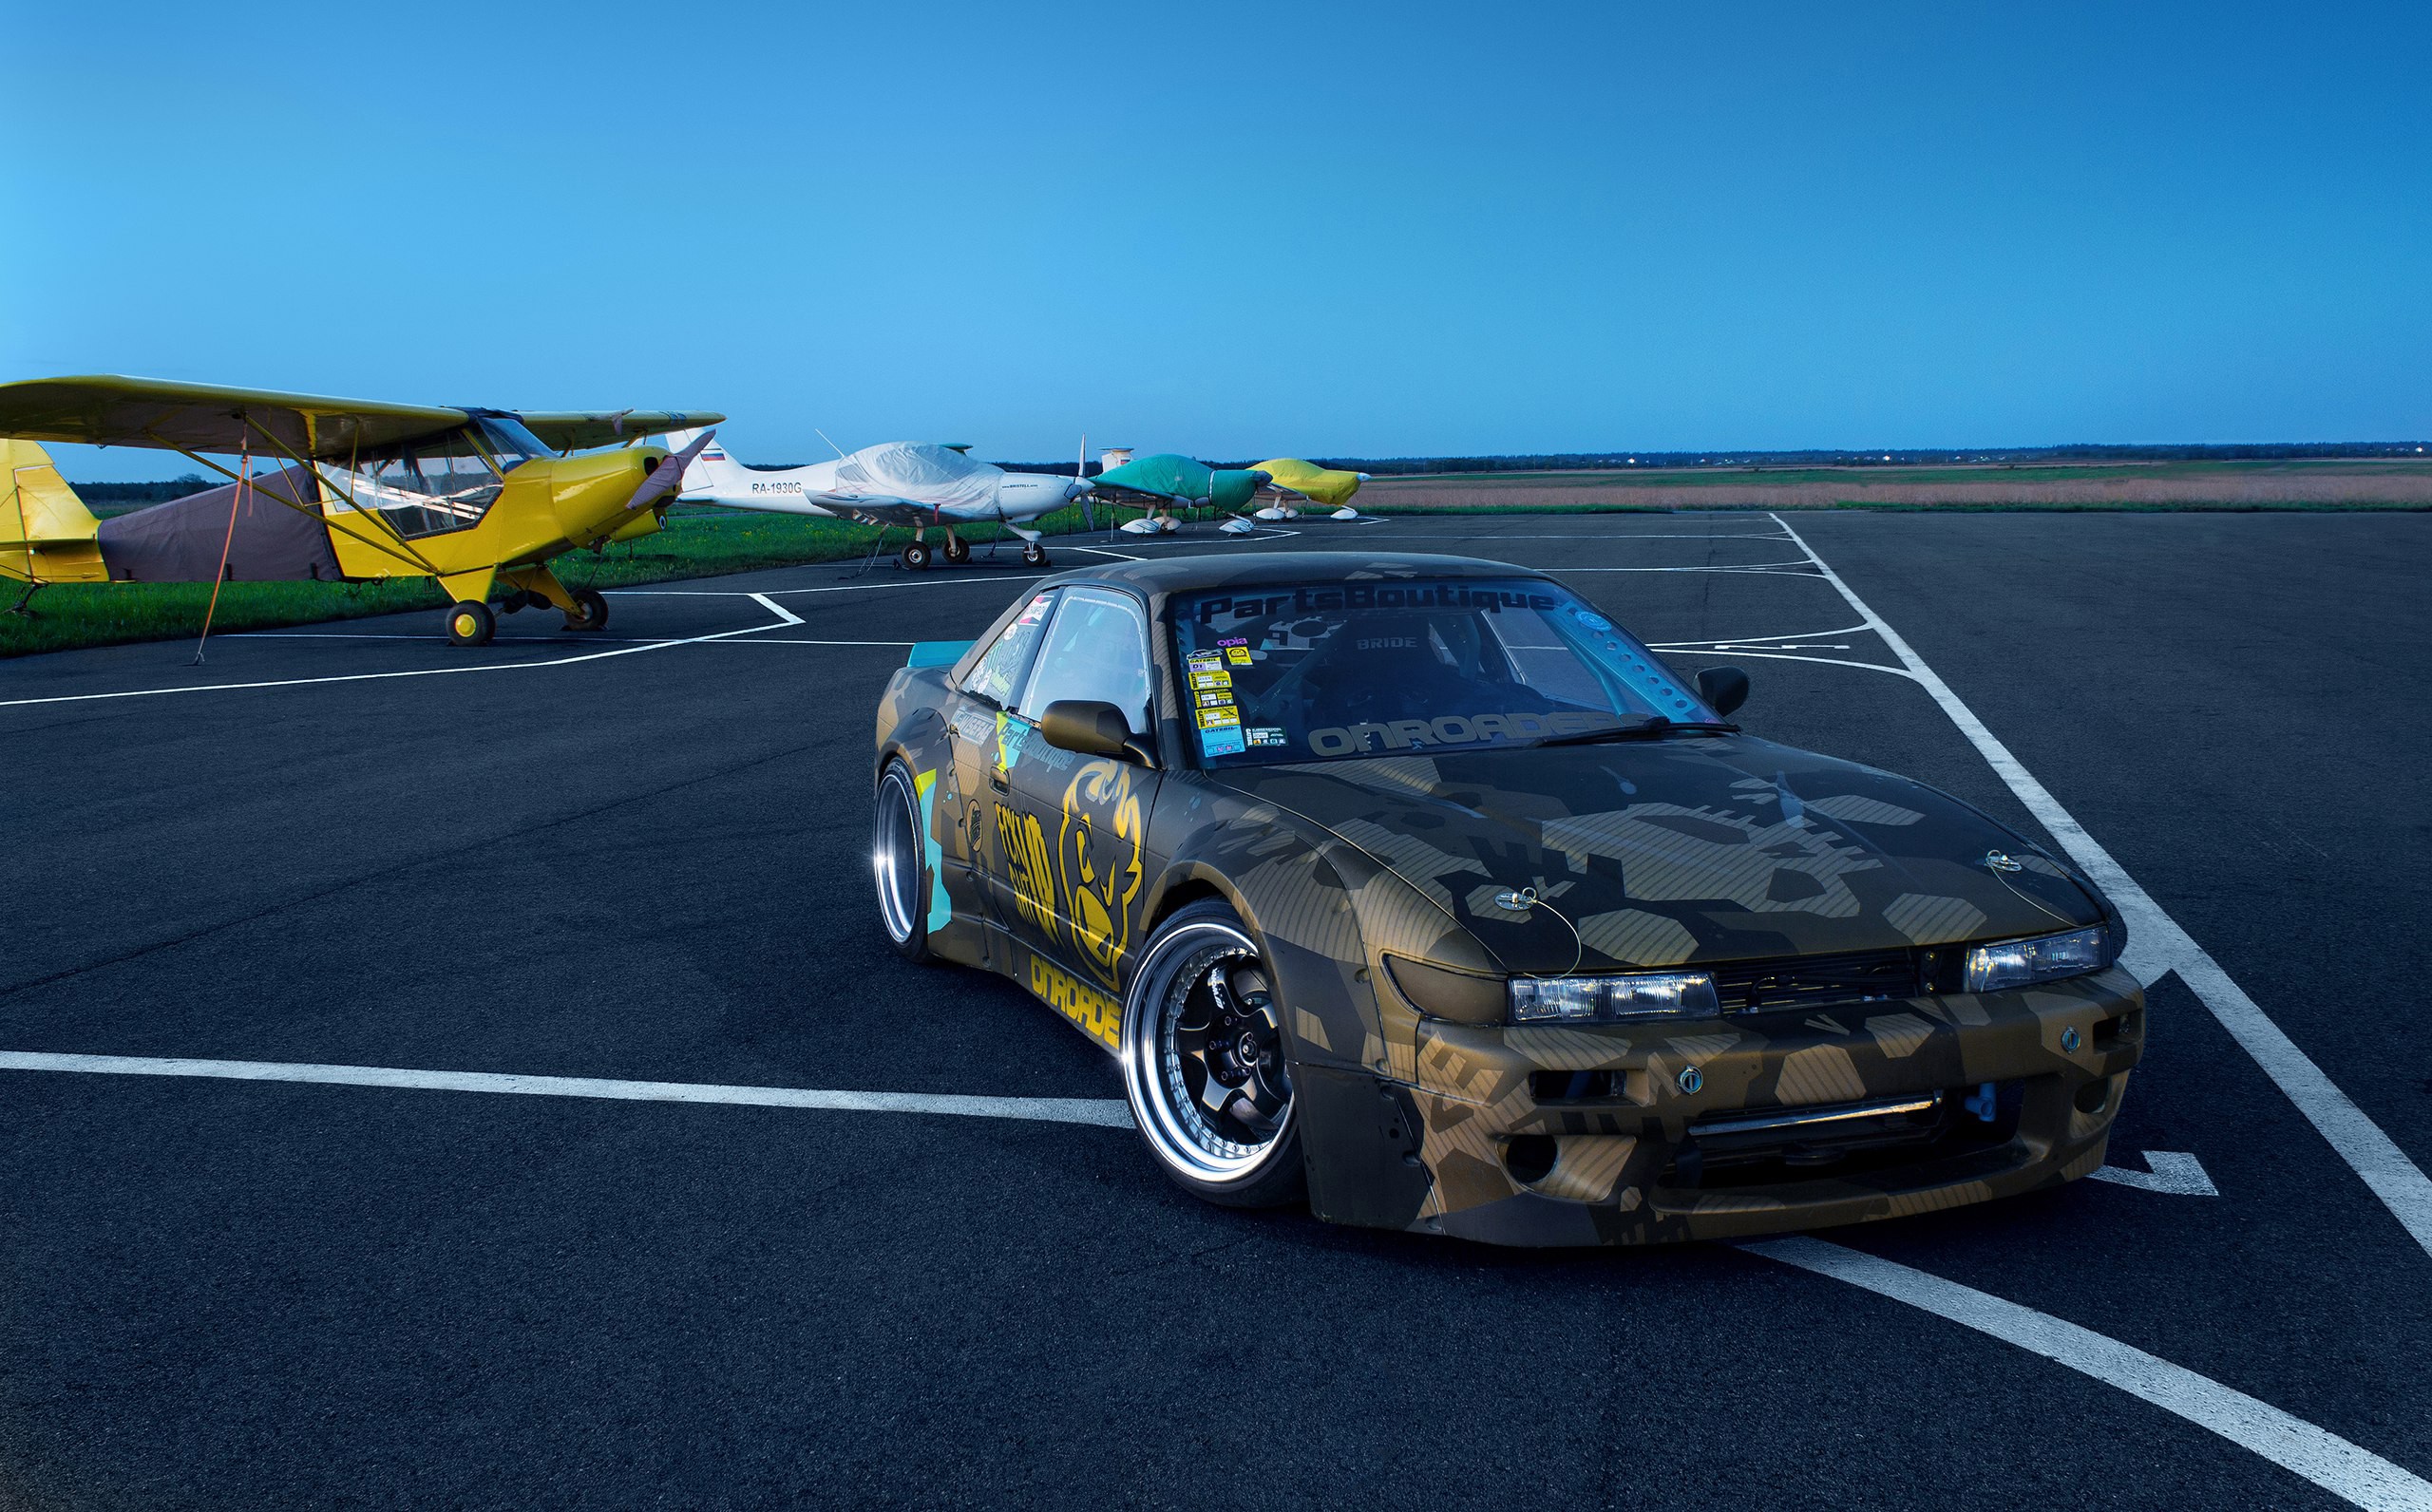 General 2560x1592 Nissan Nissan Silvia Nissan Silvia S13 Japanese cars Norway stance (cars) photography airport airplane evening stars Work Wheels Japan car vehicle aircraft black cars livery